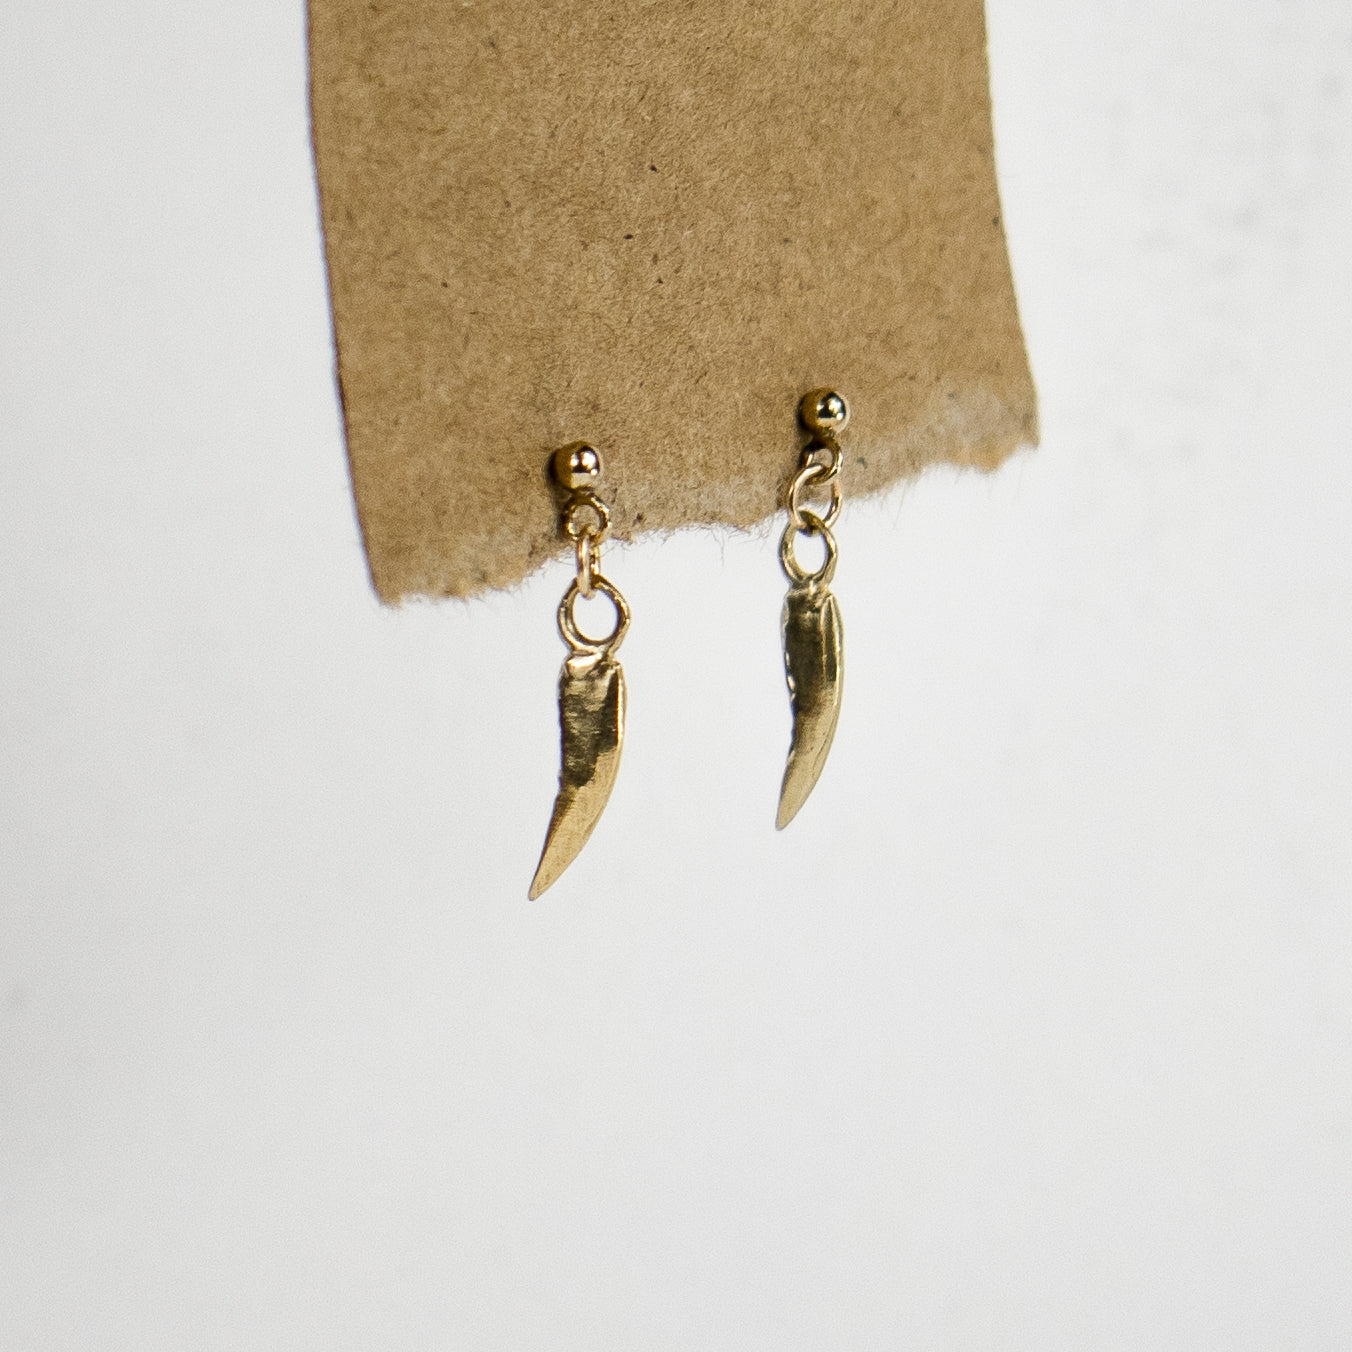 Dangling 10k solid reclaimed gold claw charms and jump-rings on gold-filled studs handmade and finished in our Catskills store-studio and available as singles to mix-and-match.